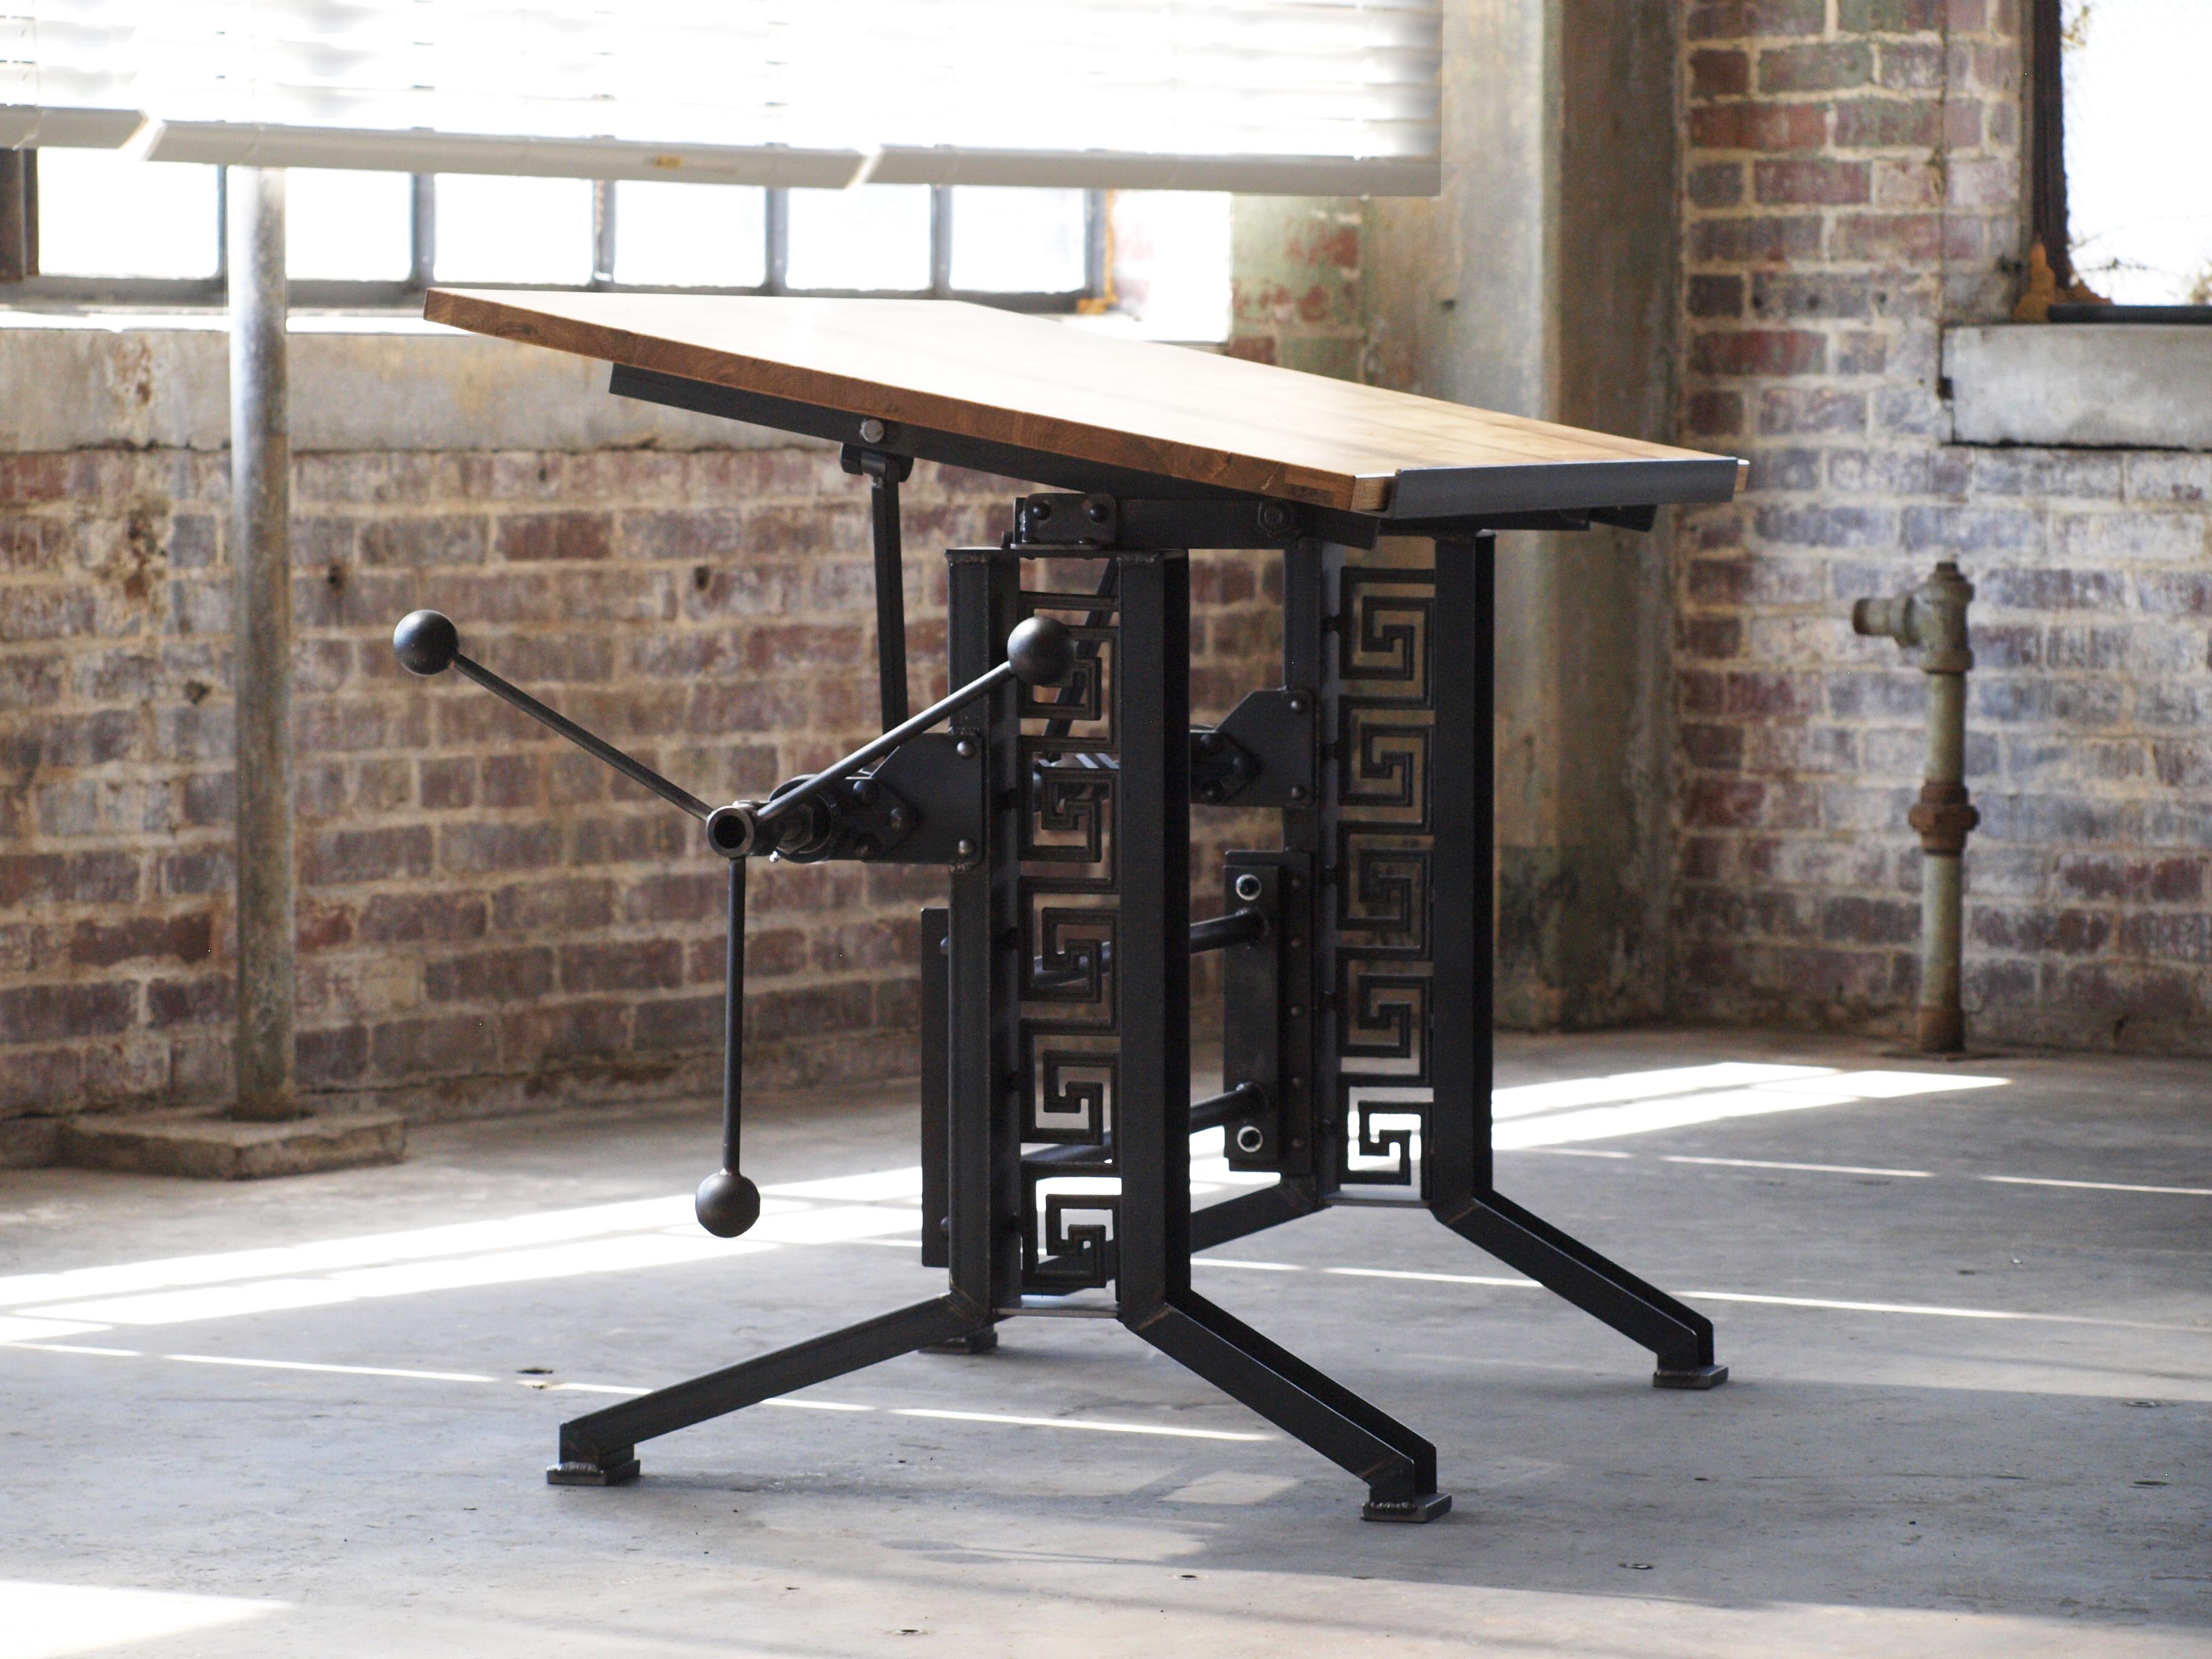 The Oak Top French Industrial Drafting Table is a thoughtfully designed and expertly crafted piece of furniture. Made in the USA with a commitment to using mostly domestic materials, including oak lumber and steel, it embodies a blend of quality and